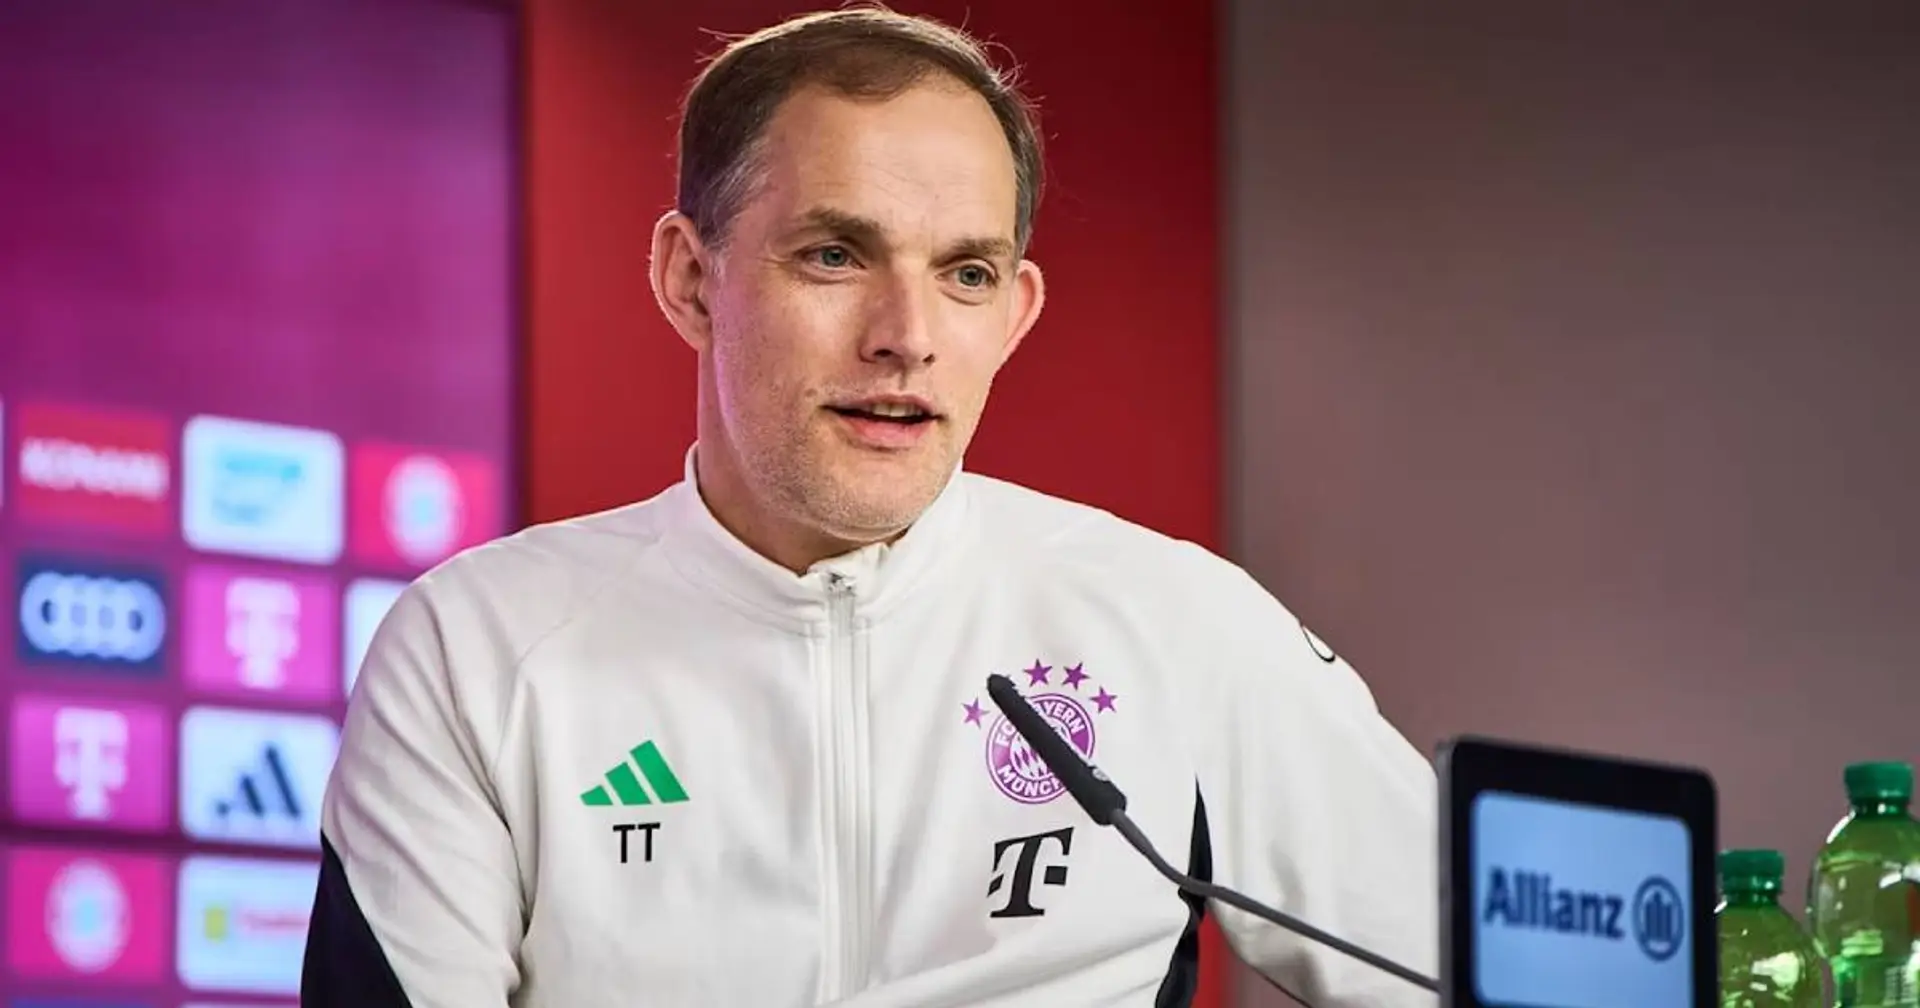 'I loved my time in Premier League': Thomas Tuchel open to England return amid Man United links